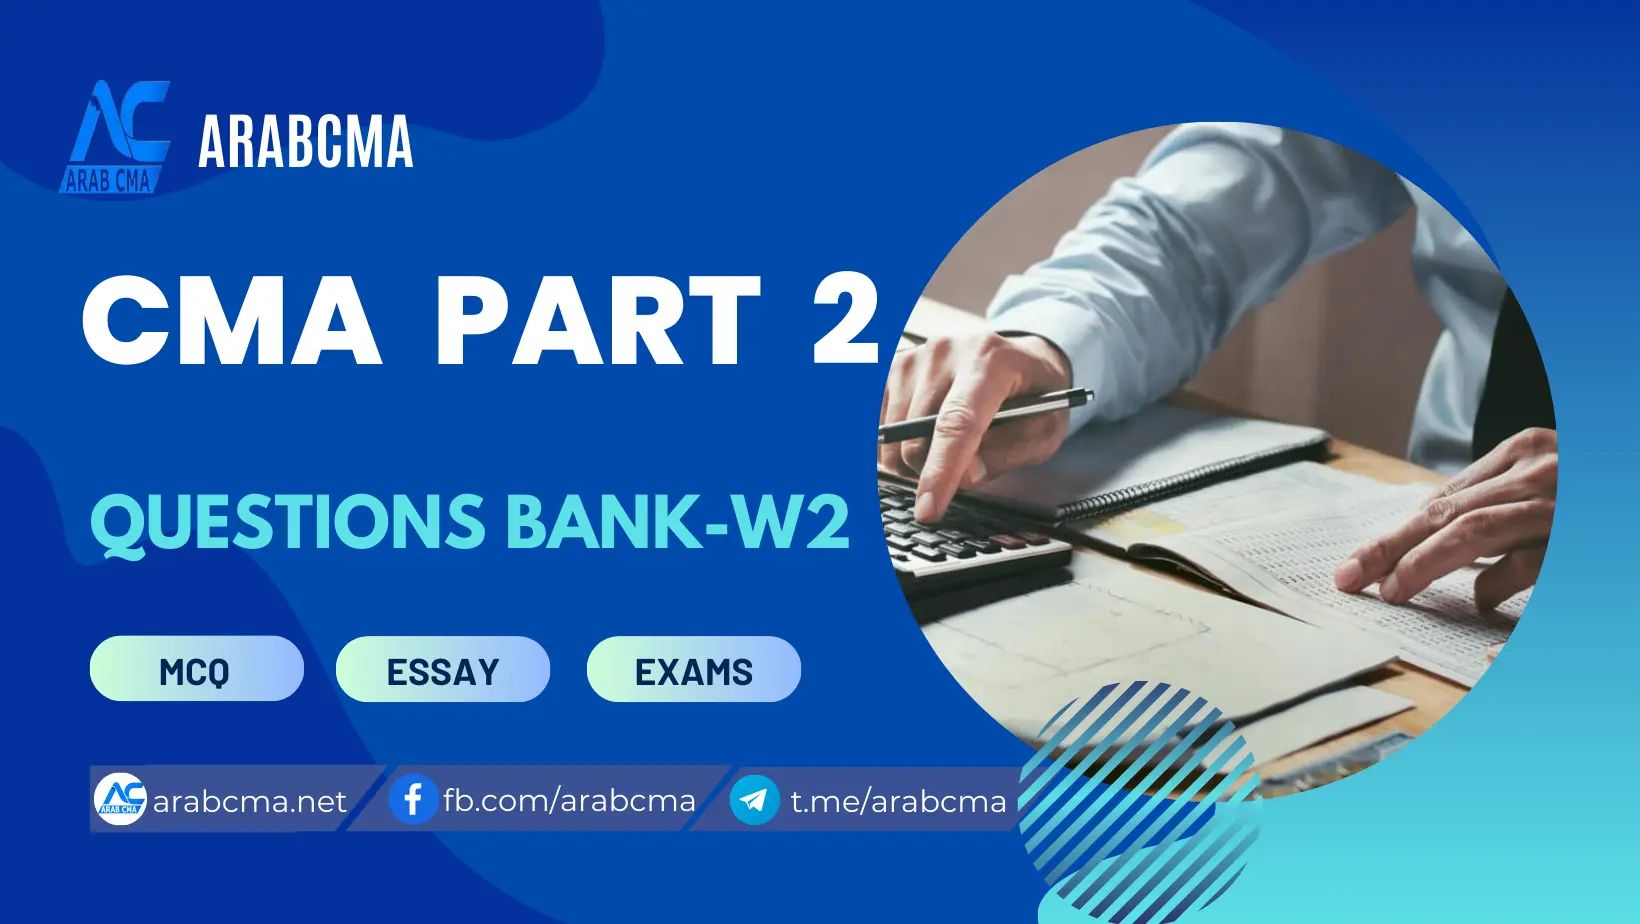 CMA PART 2 – WLY QUESTIONS BANK